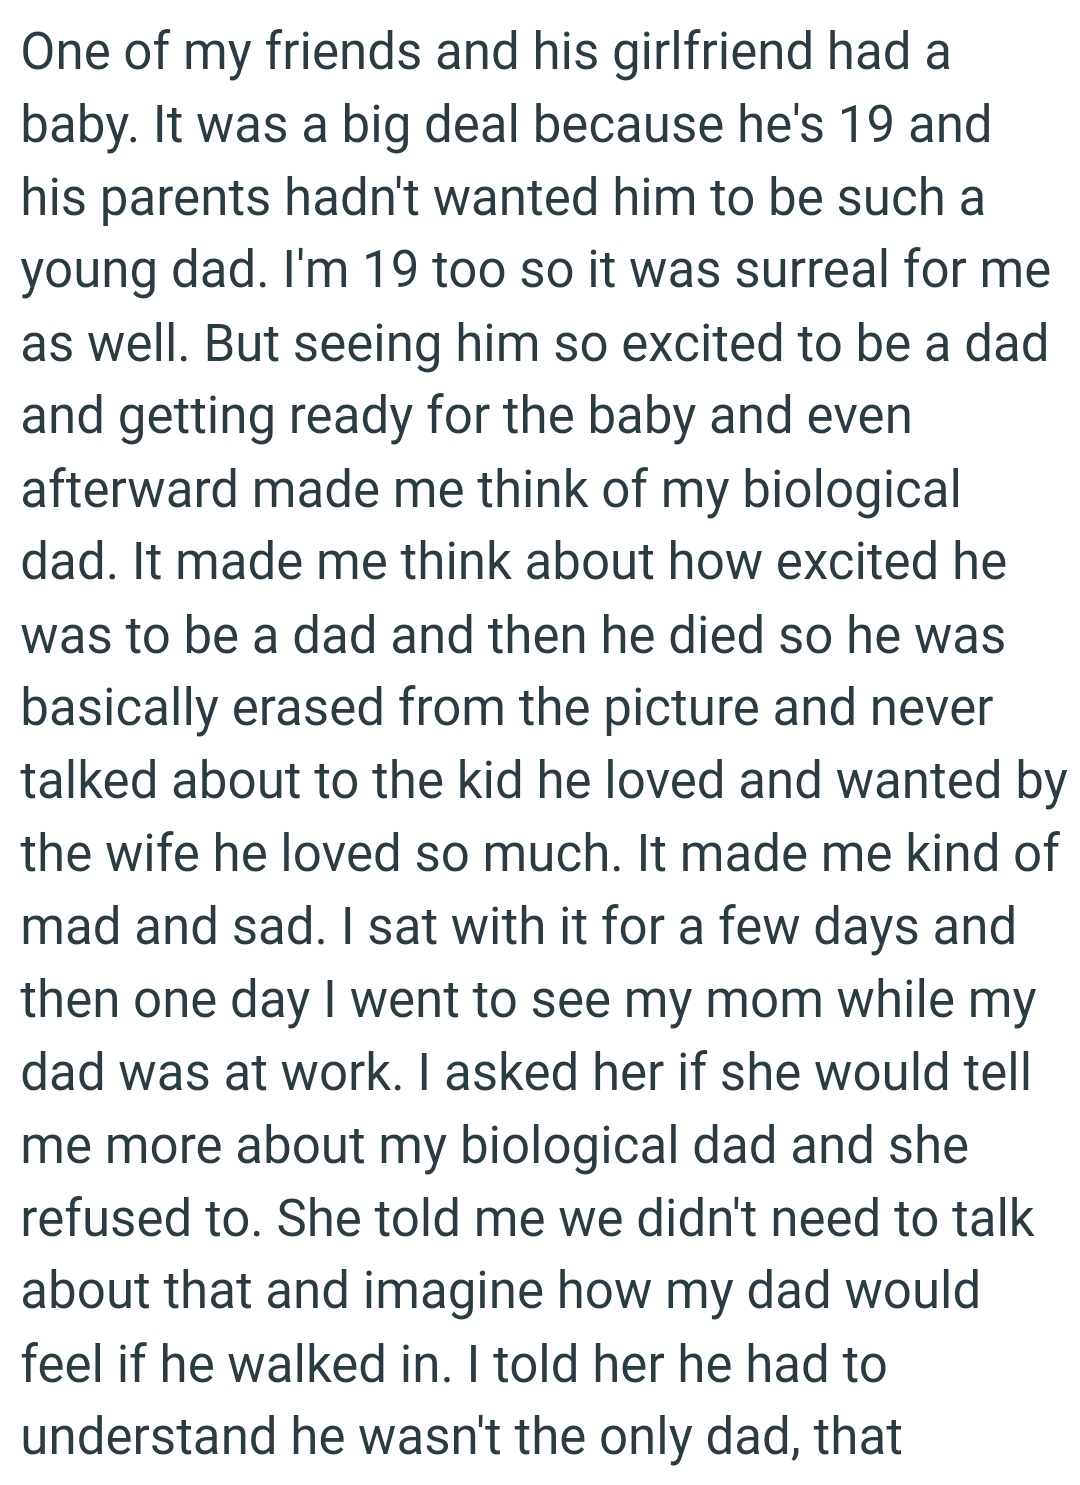 It made the OP think about how excited he was to be a dad